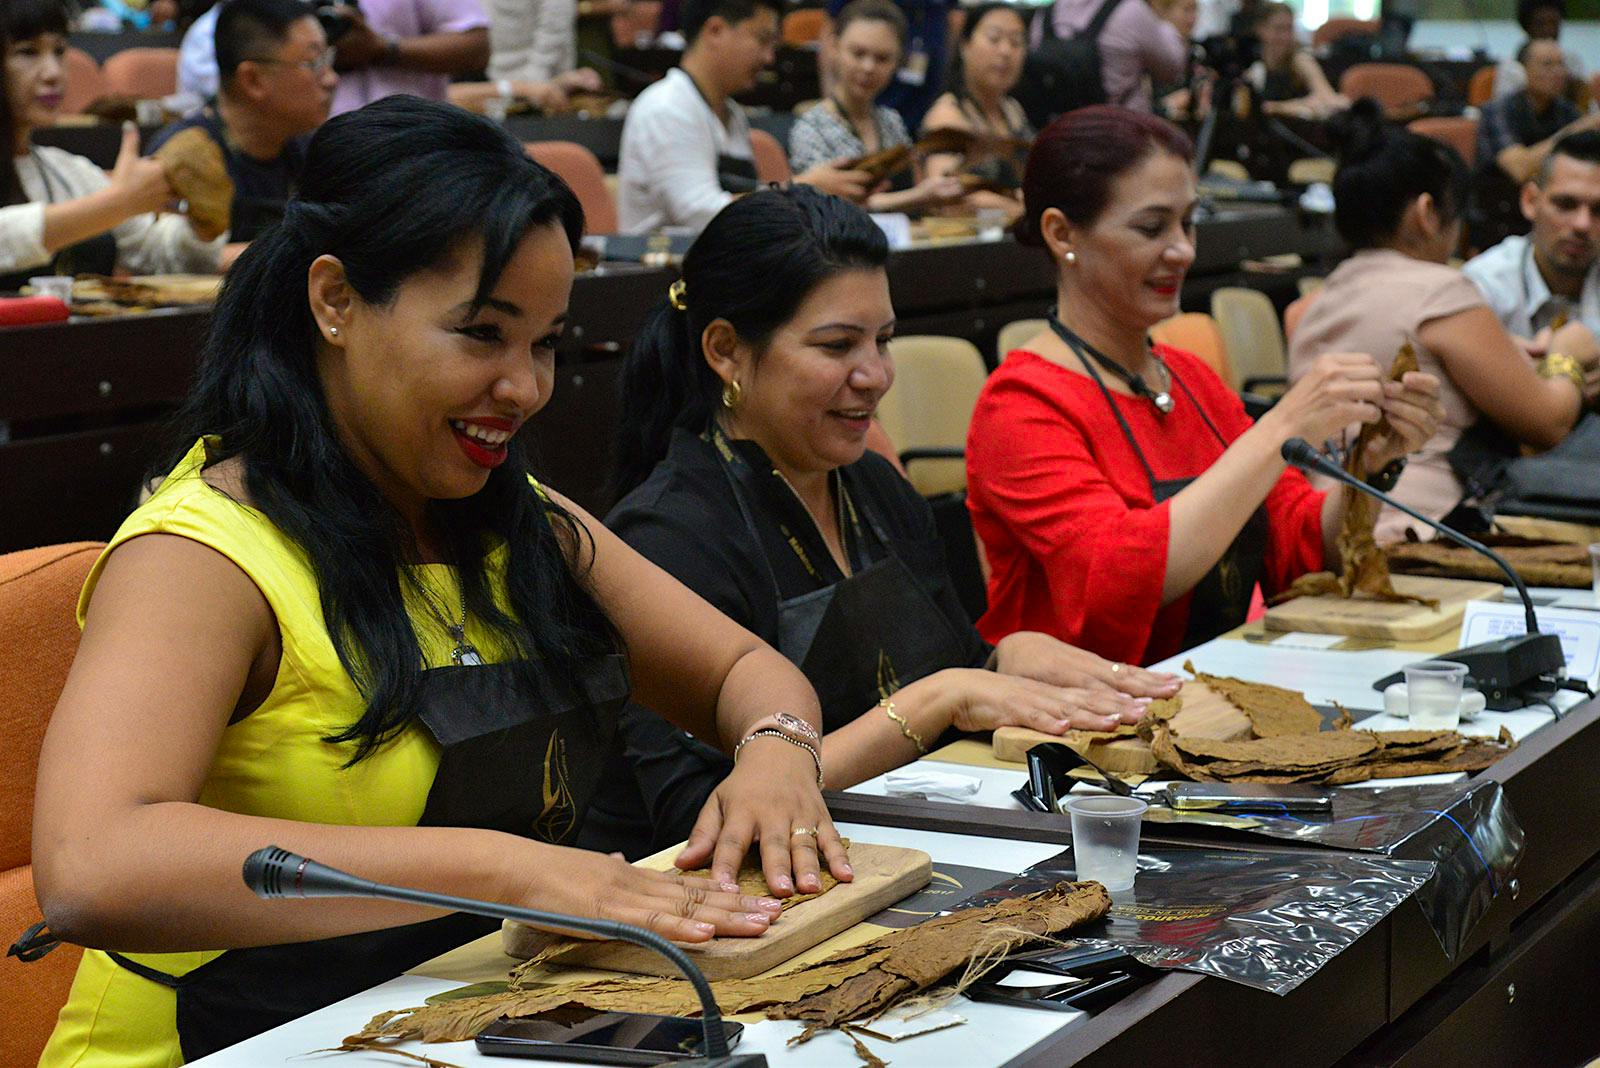 A number of attendees learn how to roll a cigar during an instructional seminar.